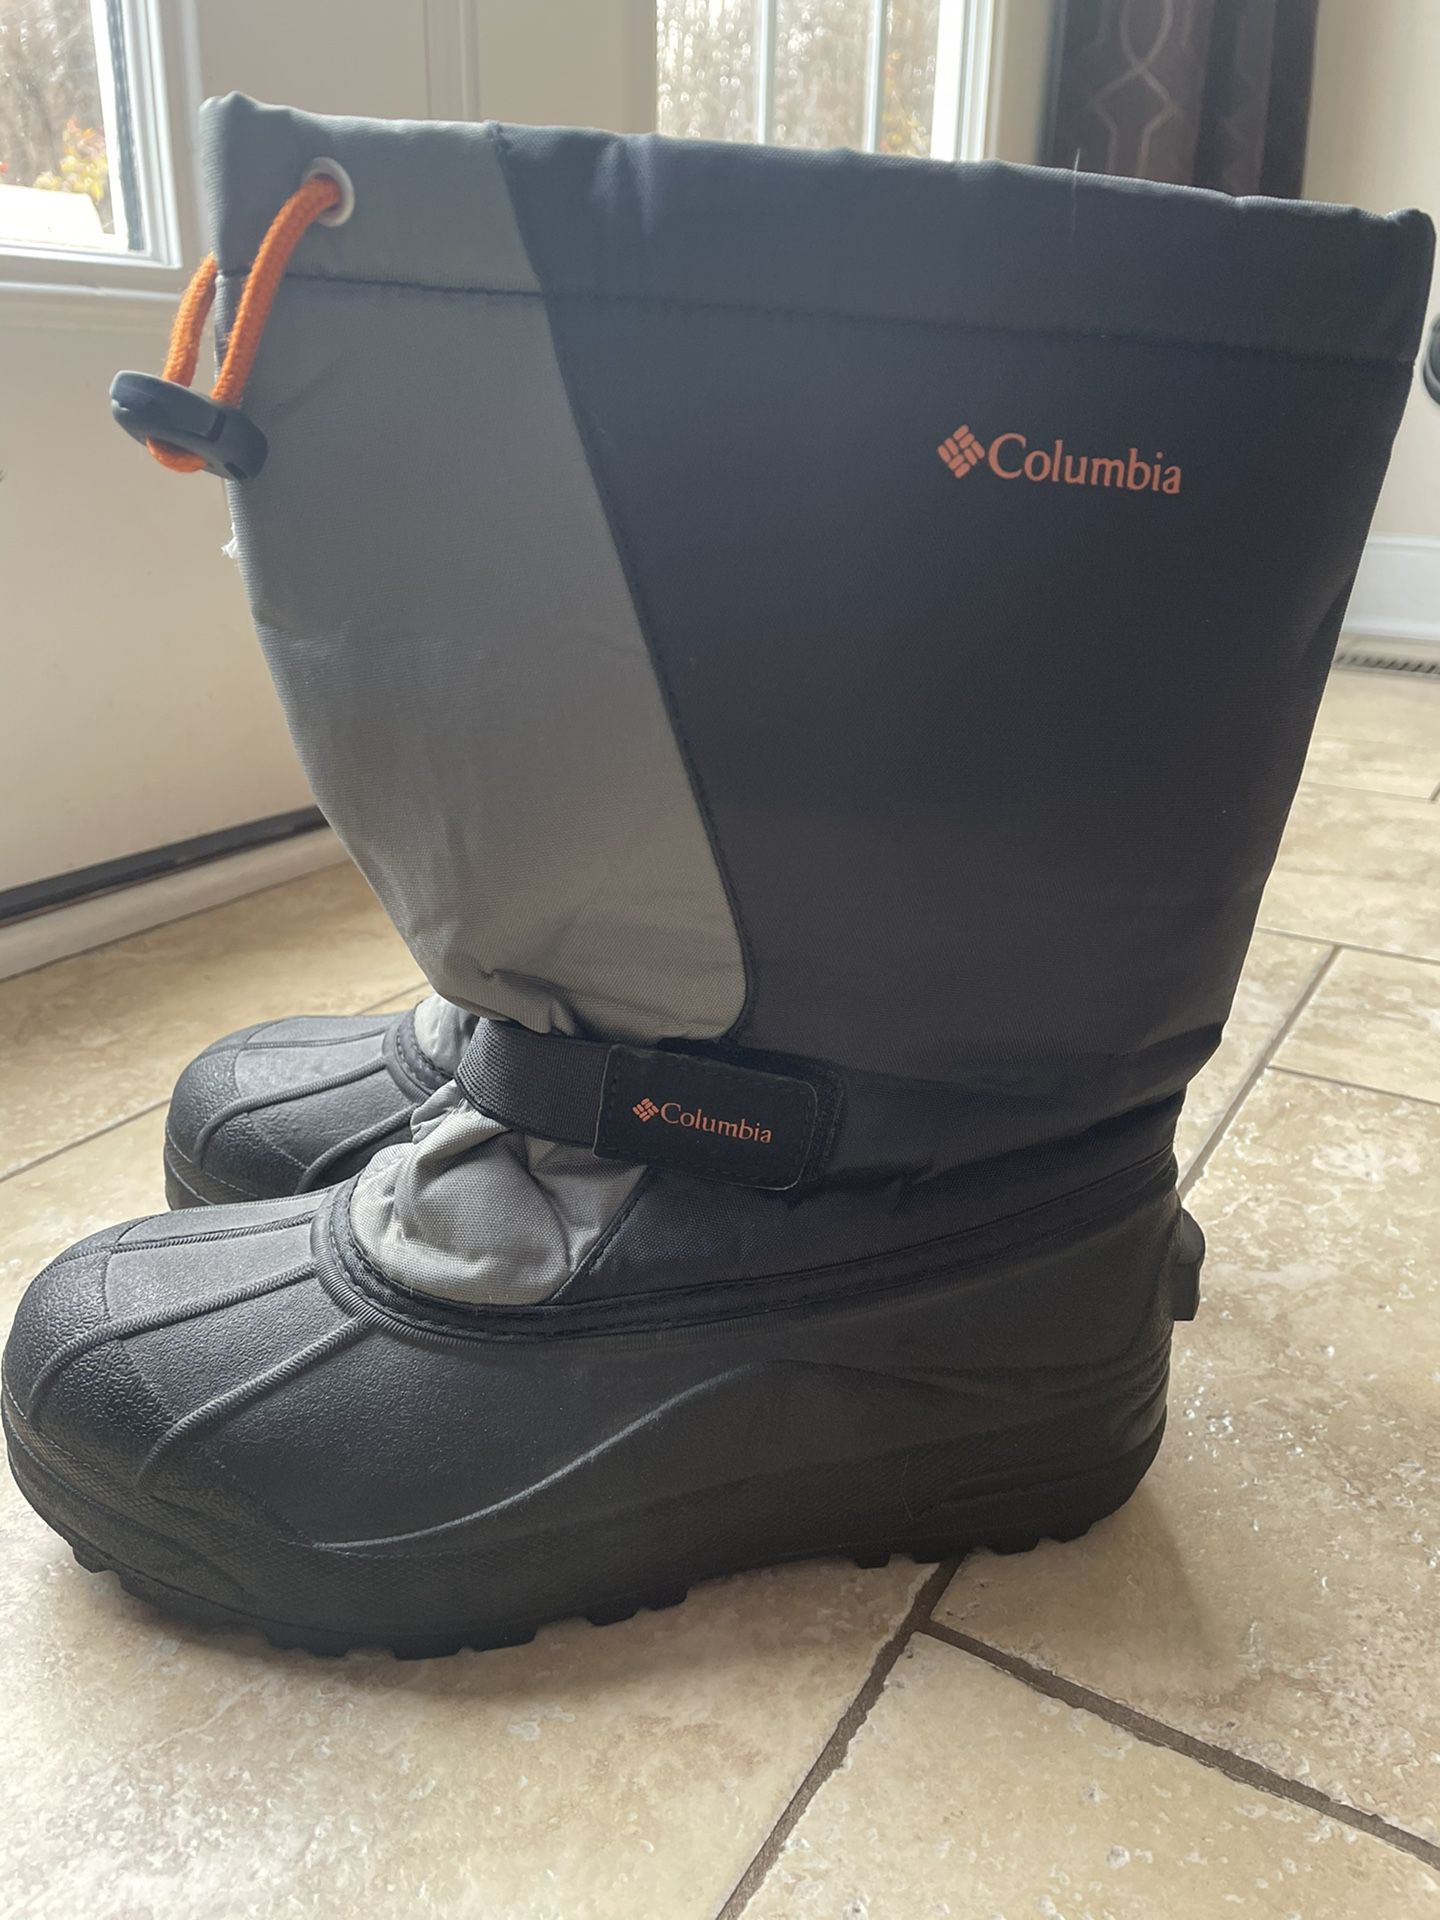 Boy’s Columbia Snow boots - Size 6